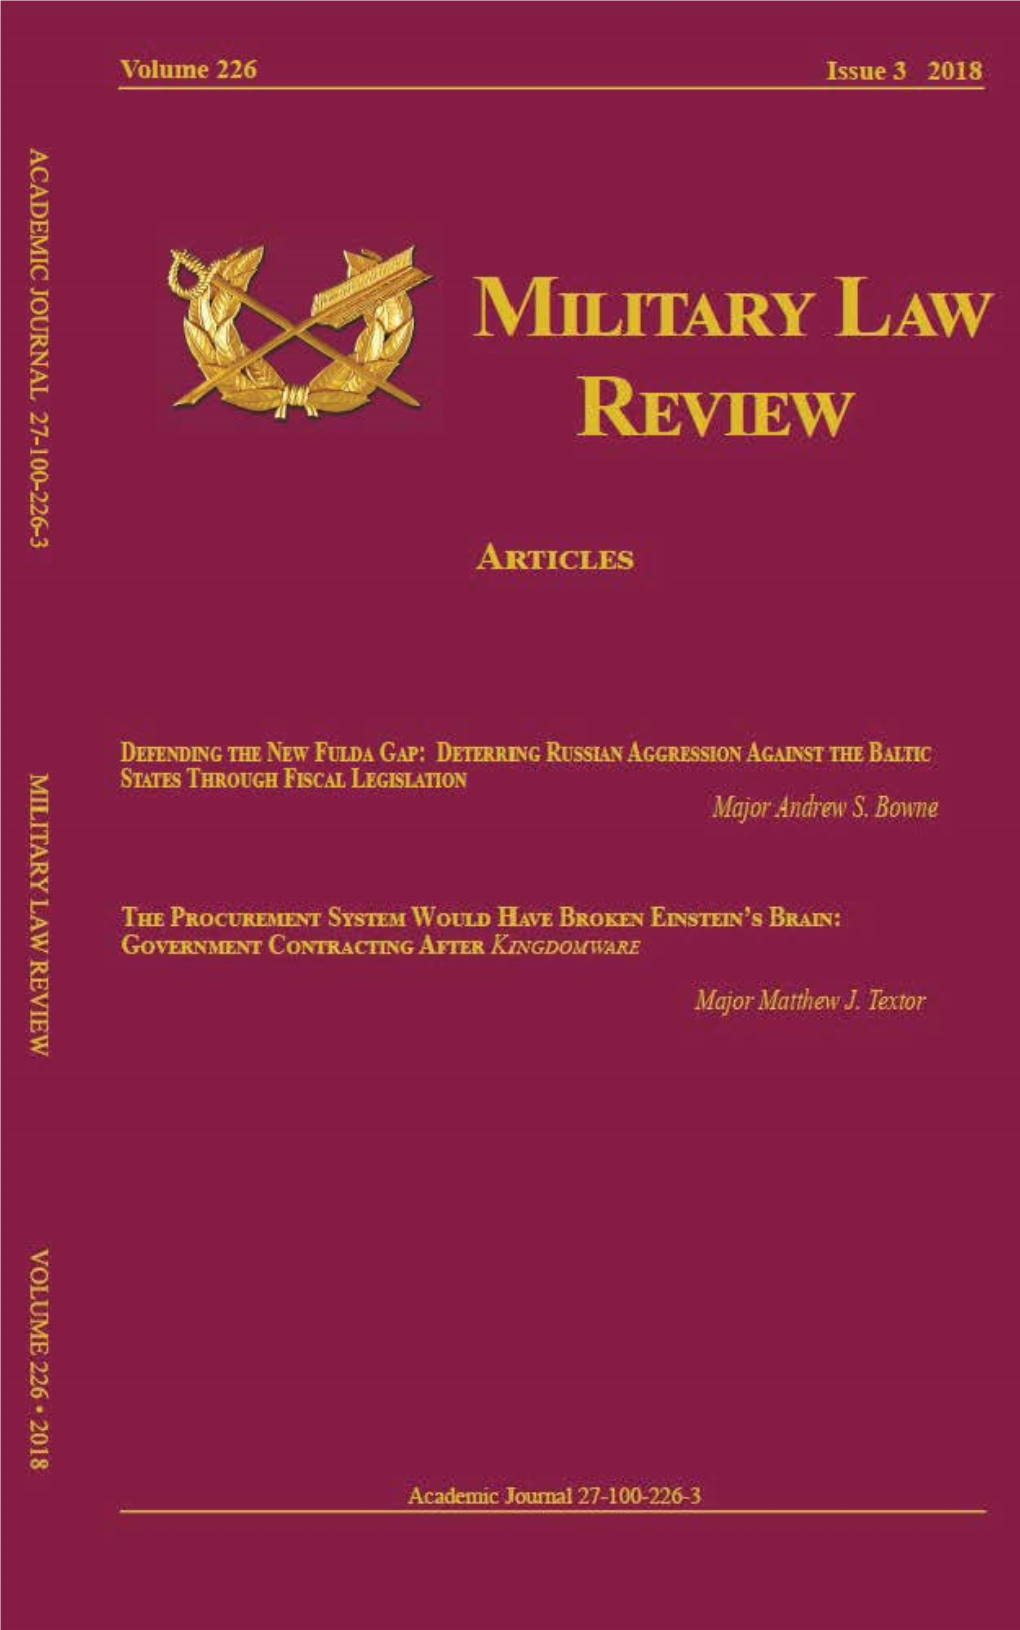 Military Law Review, Volume 226, Issue 3, 2018